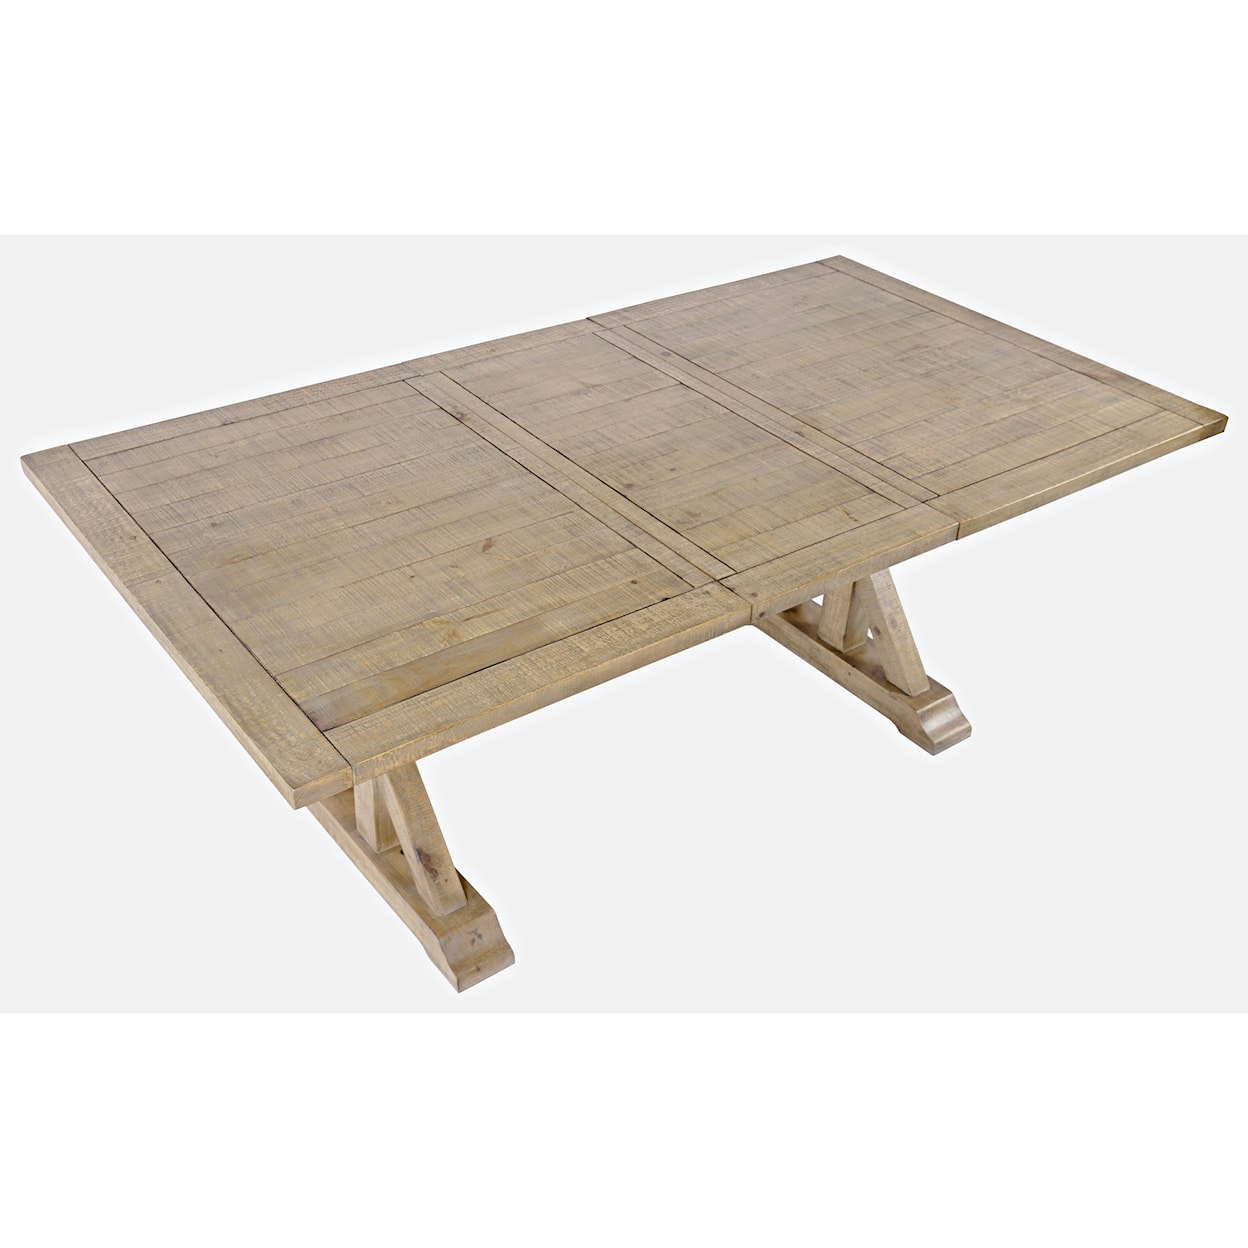 Jofran Carlyle Crossing Dining Table